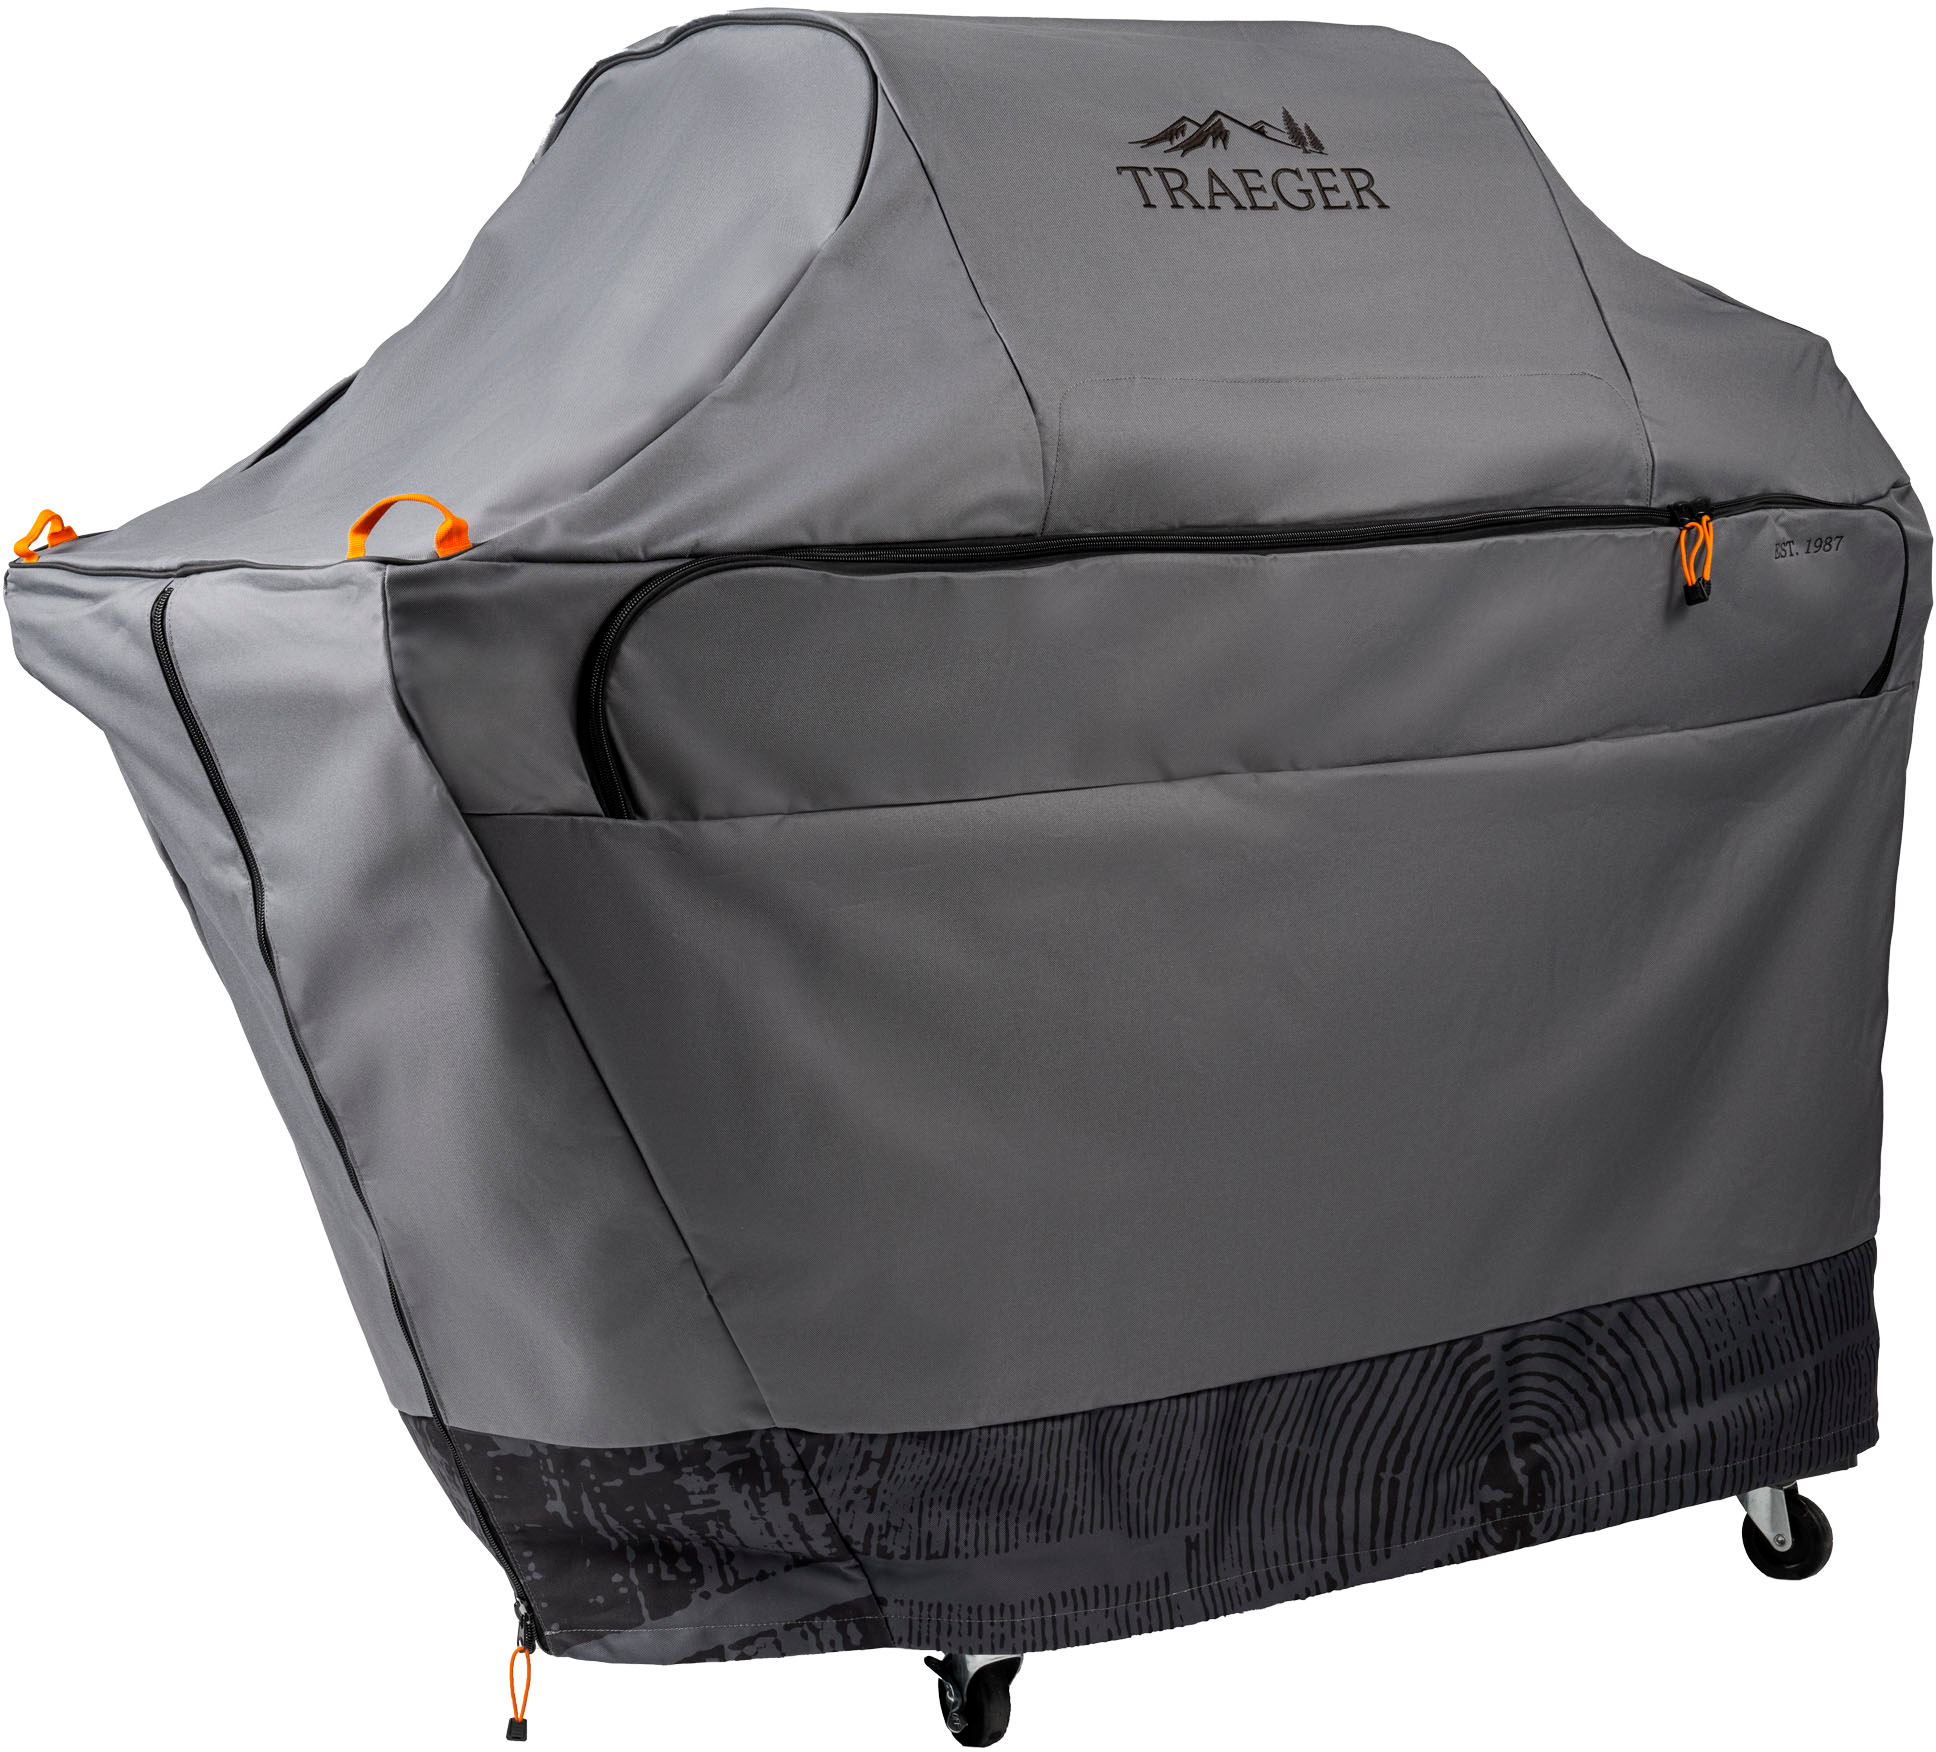 Angle View: Traeger Grills - Full-Length Grill Cover for Ironwood 885 - Black